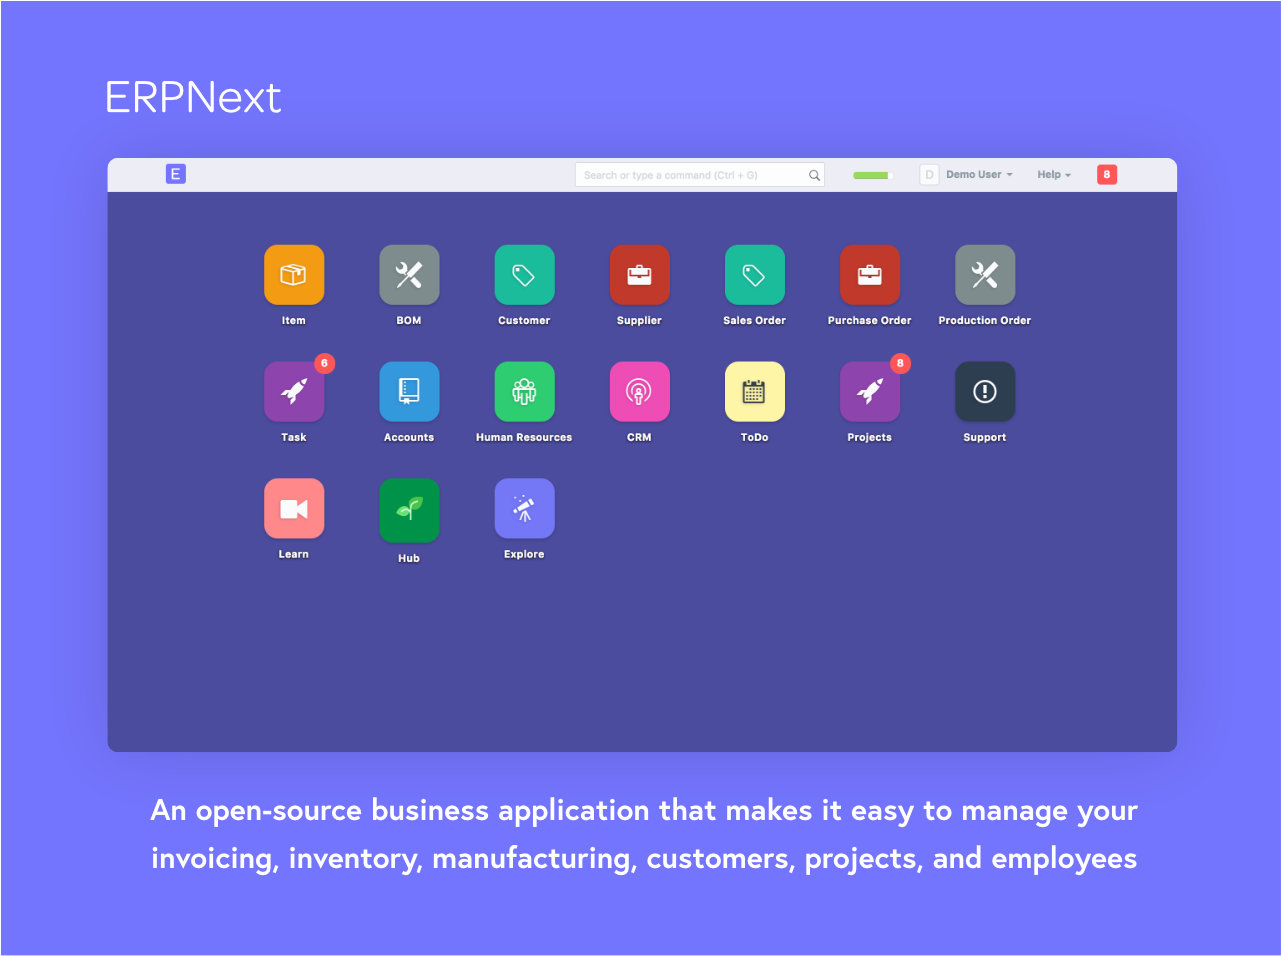 ERPNext: an open-source business application that makes it easy to manage your invoicing, inventory, manufacturing, customers, projects, and employees